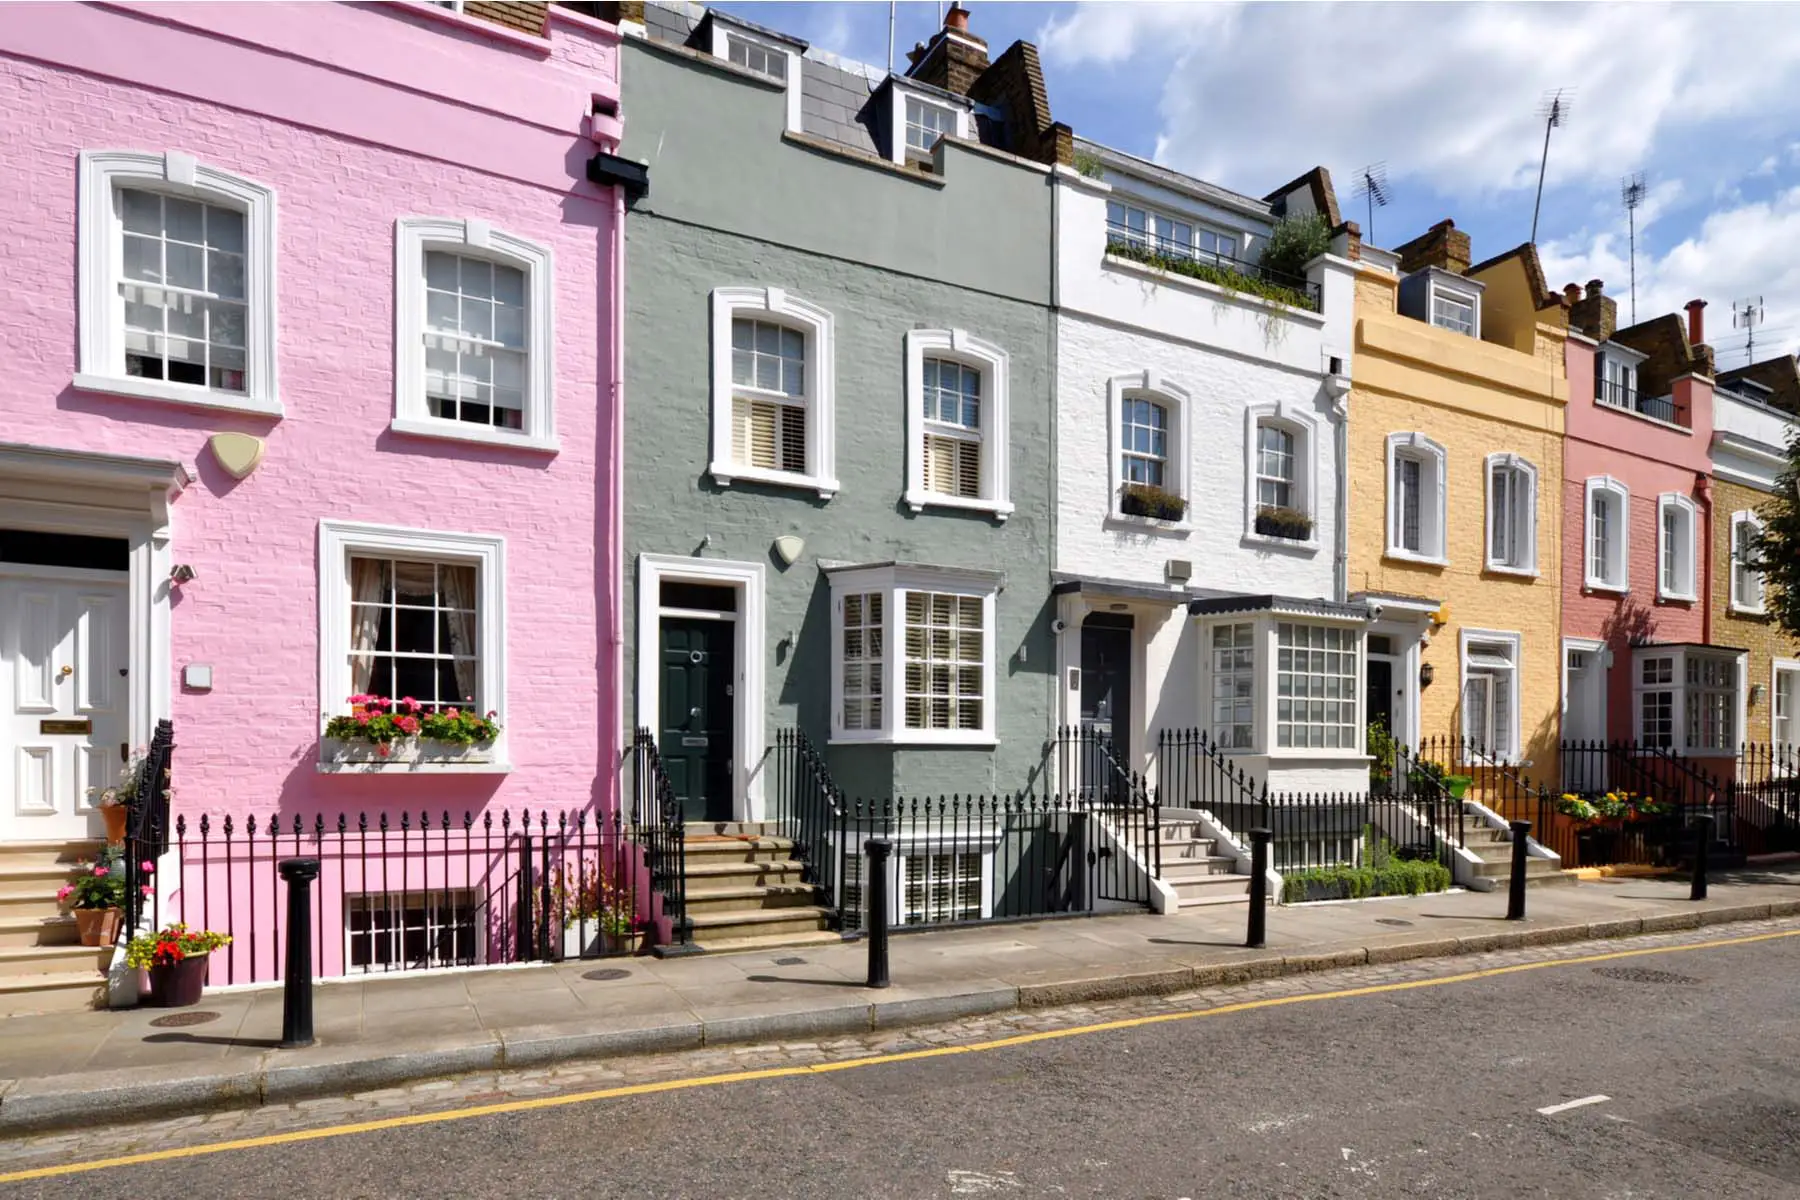 brightly colored terrace homes in London